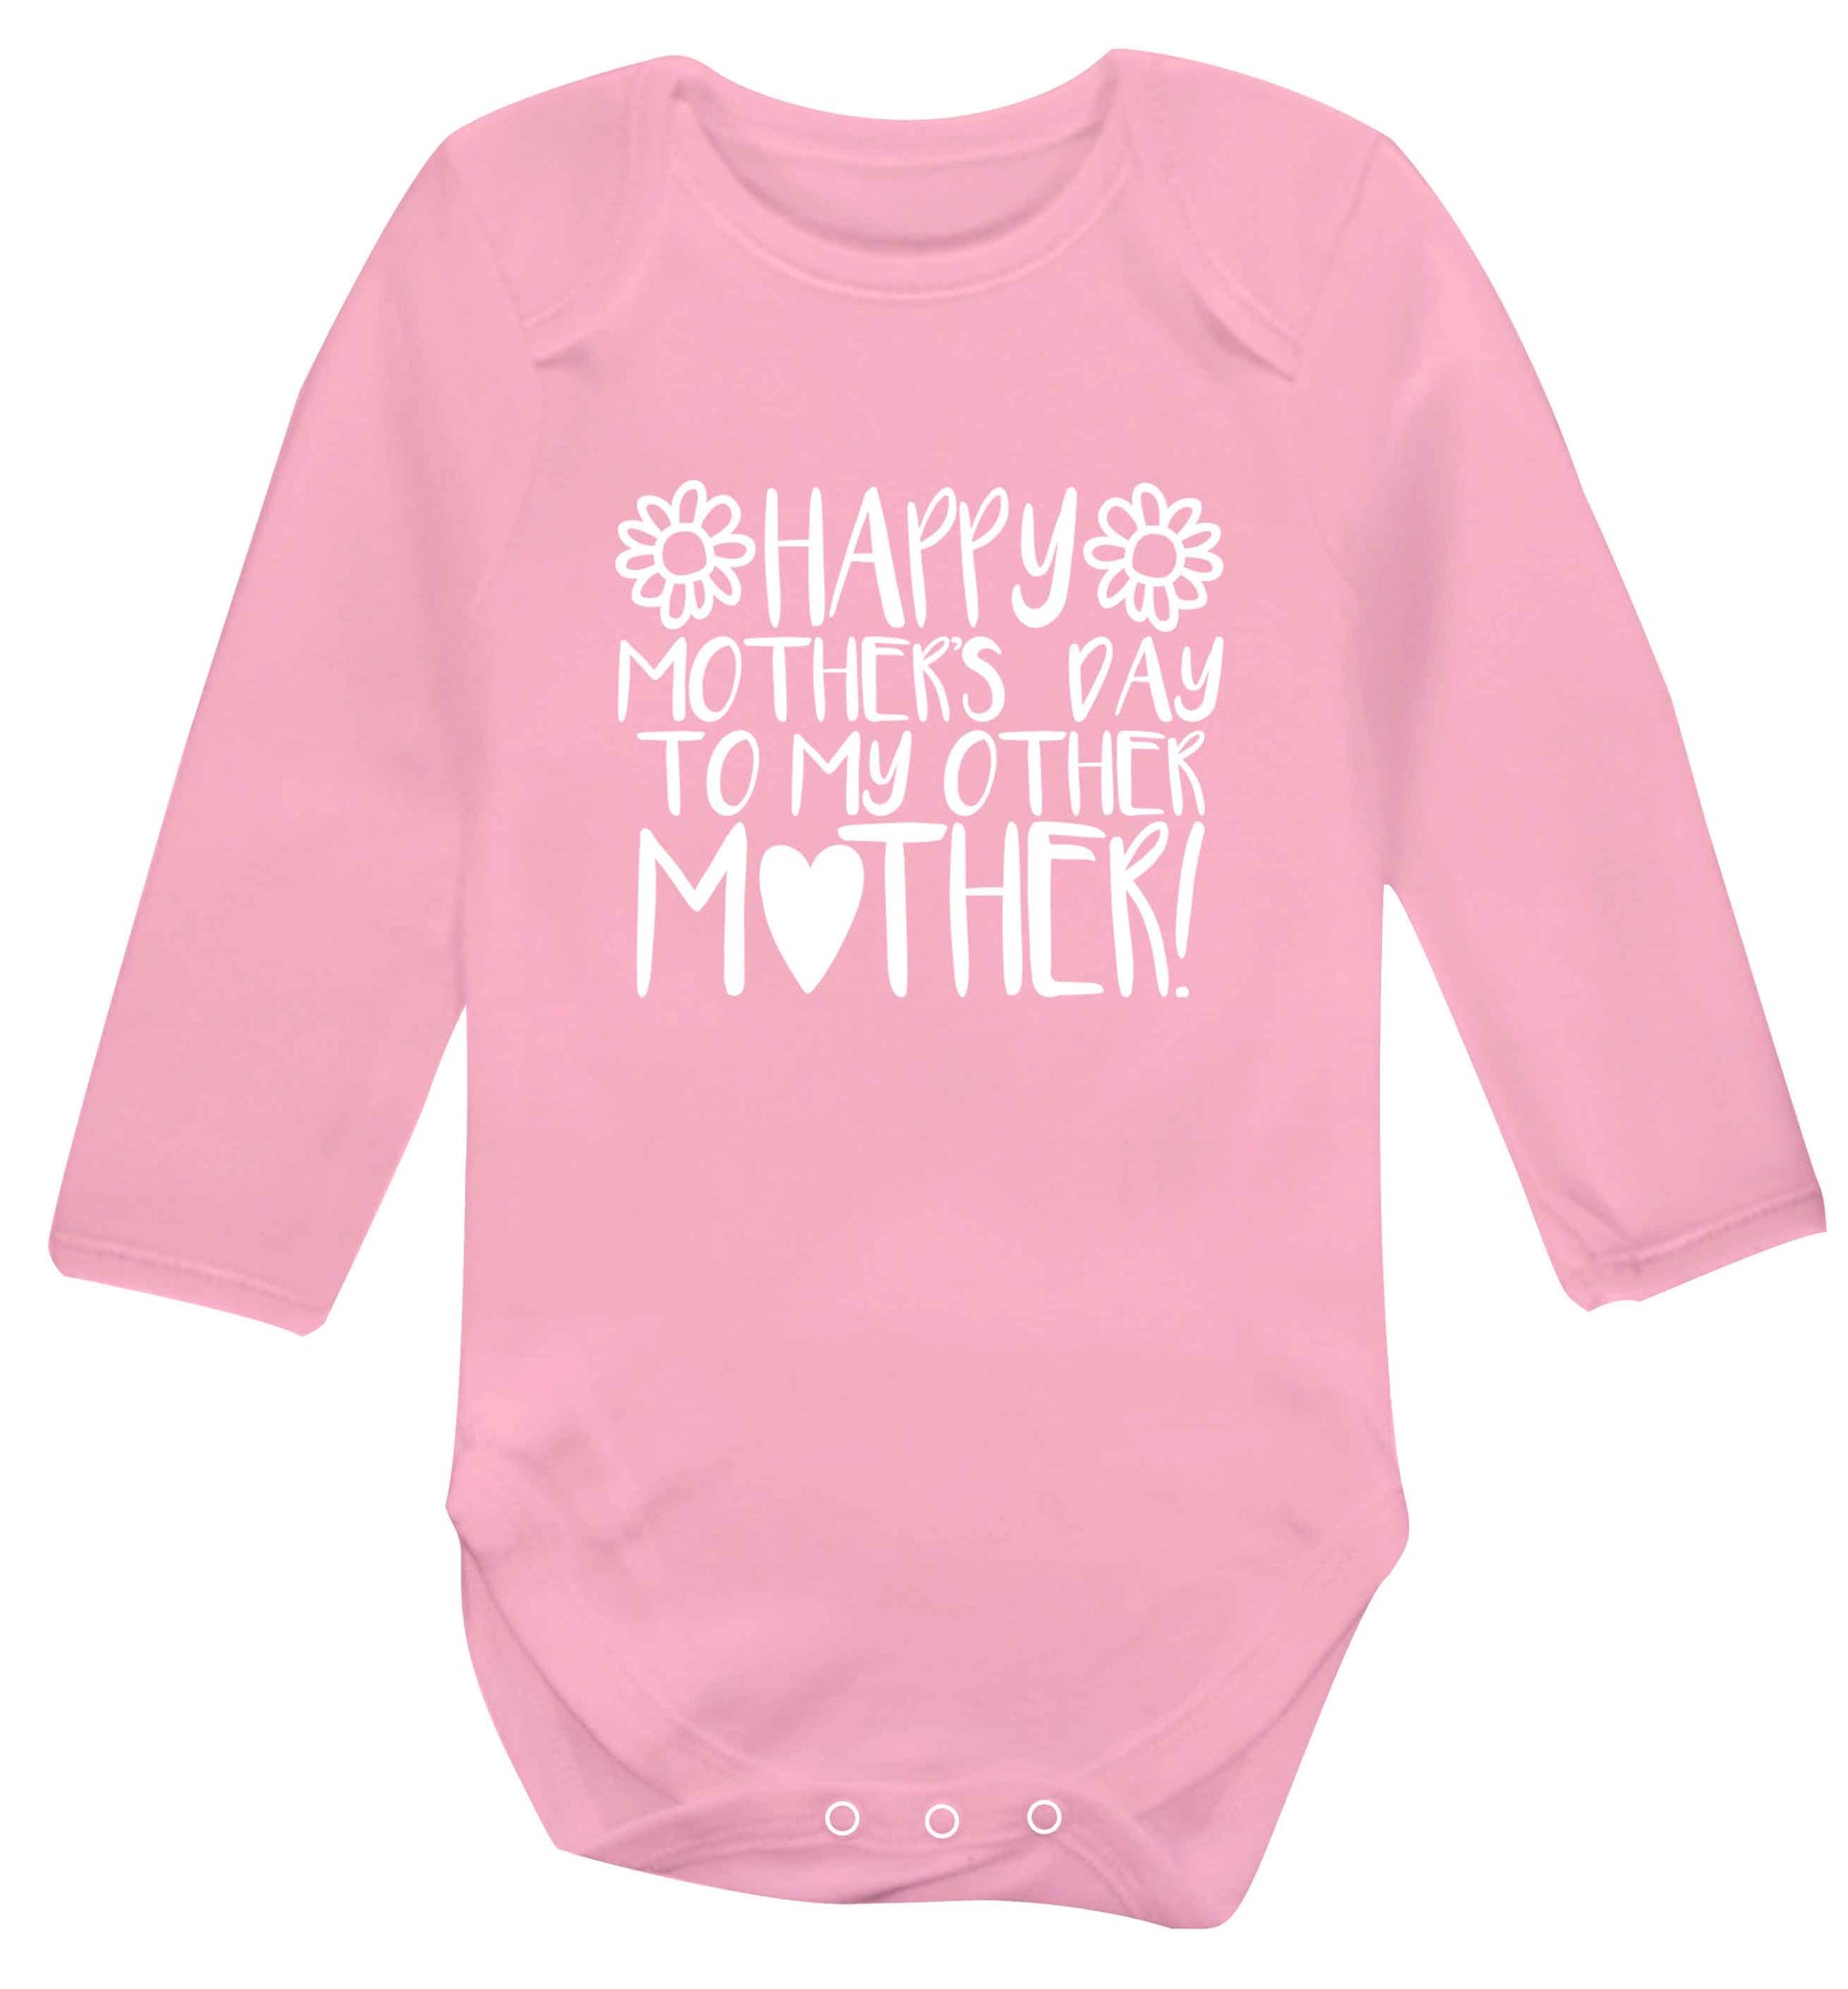 Happy mother's day to my other mother baby vest long sleeved pale pink 6-12 months